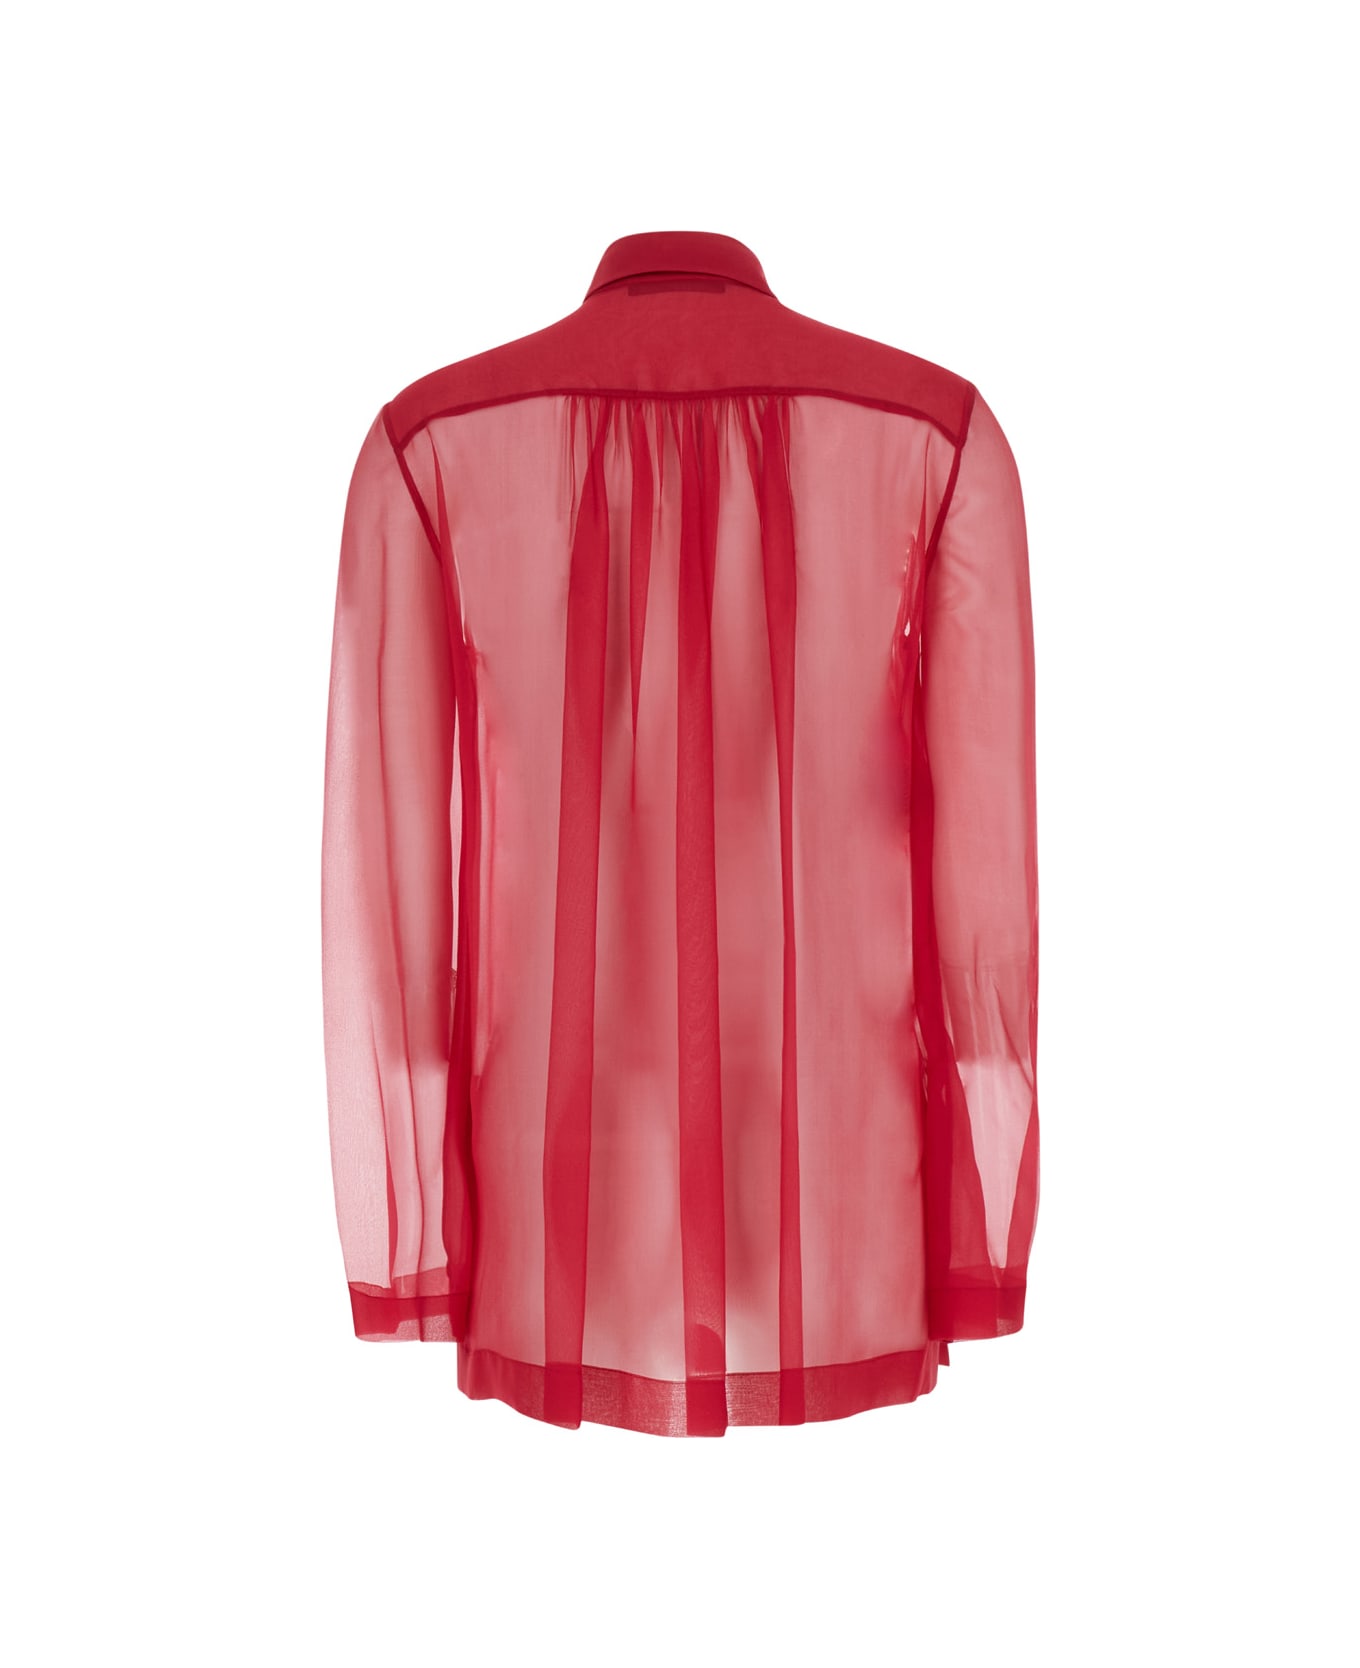 Alberta Ferretti Red Shirt With Pointed Collar In Chiffon Woman - Pink